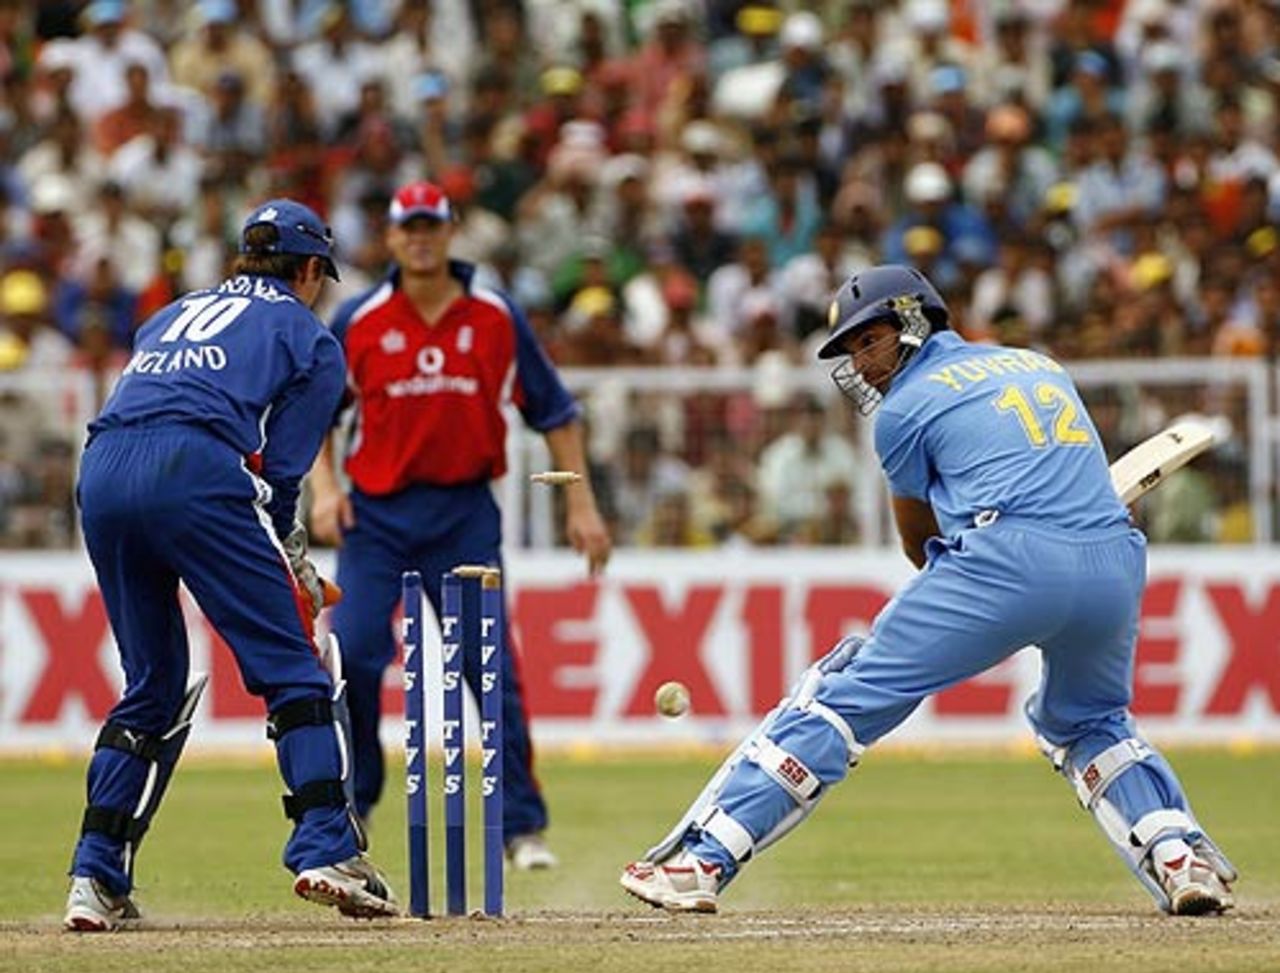 Yuvraj Singh looks back to see the furniture rearranged, India v England, 2nd ODI, Faridabad, March 31, 2006